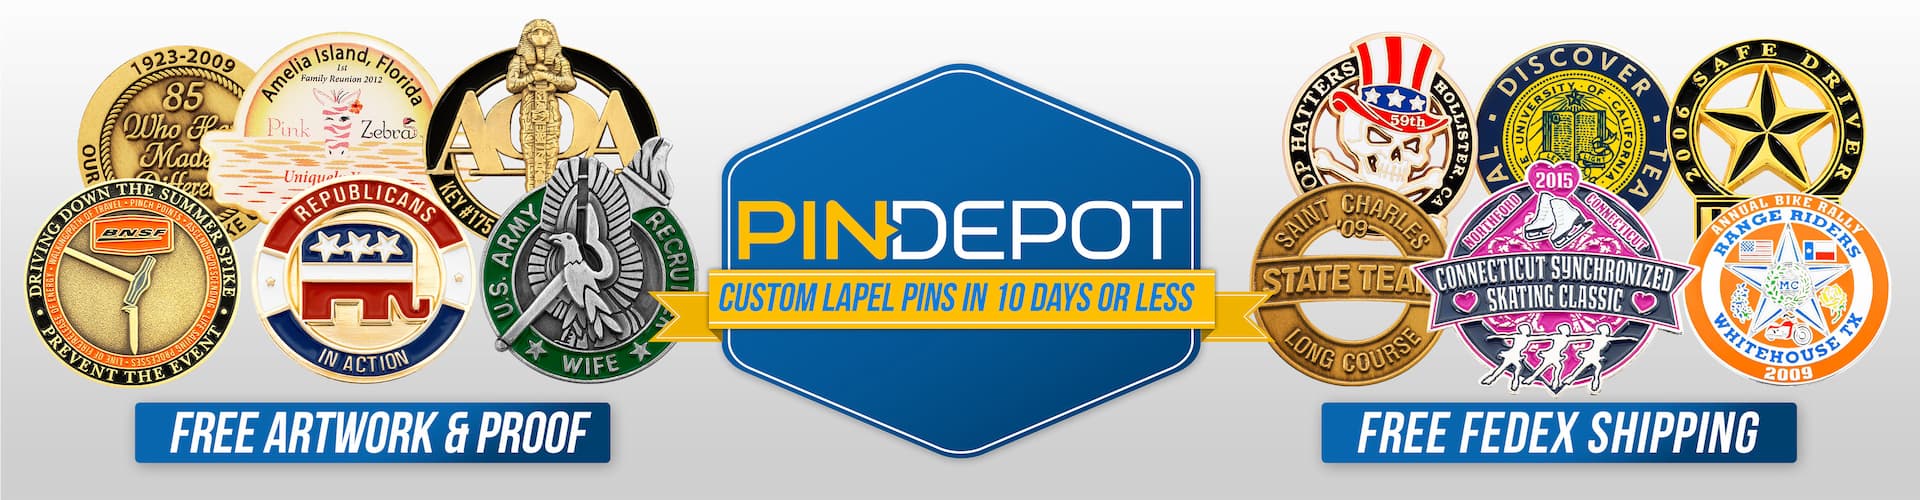 Pin Depot - Custom Lapel Pins in 10 Days or Less - Large